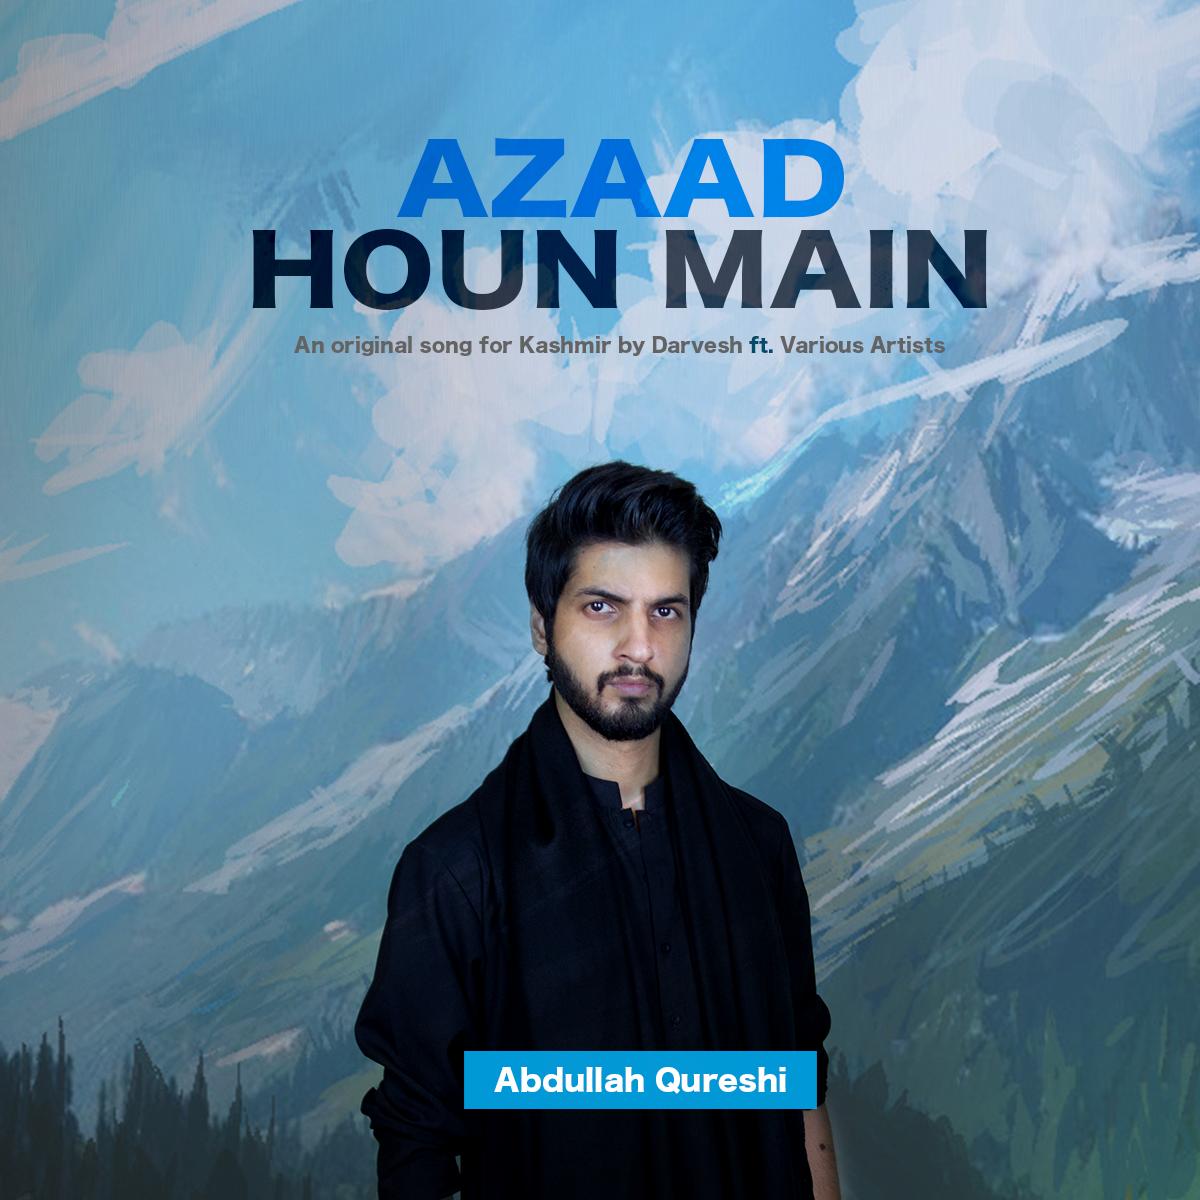 Raising our voices for KASHMIR!
A project by @DarveshBand
Stay tuned... #AzaadHounMain #istandwithkashmir